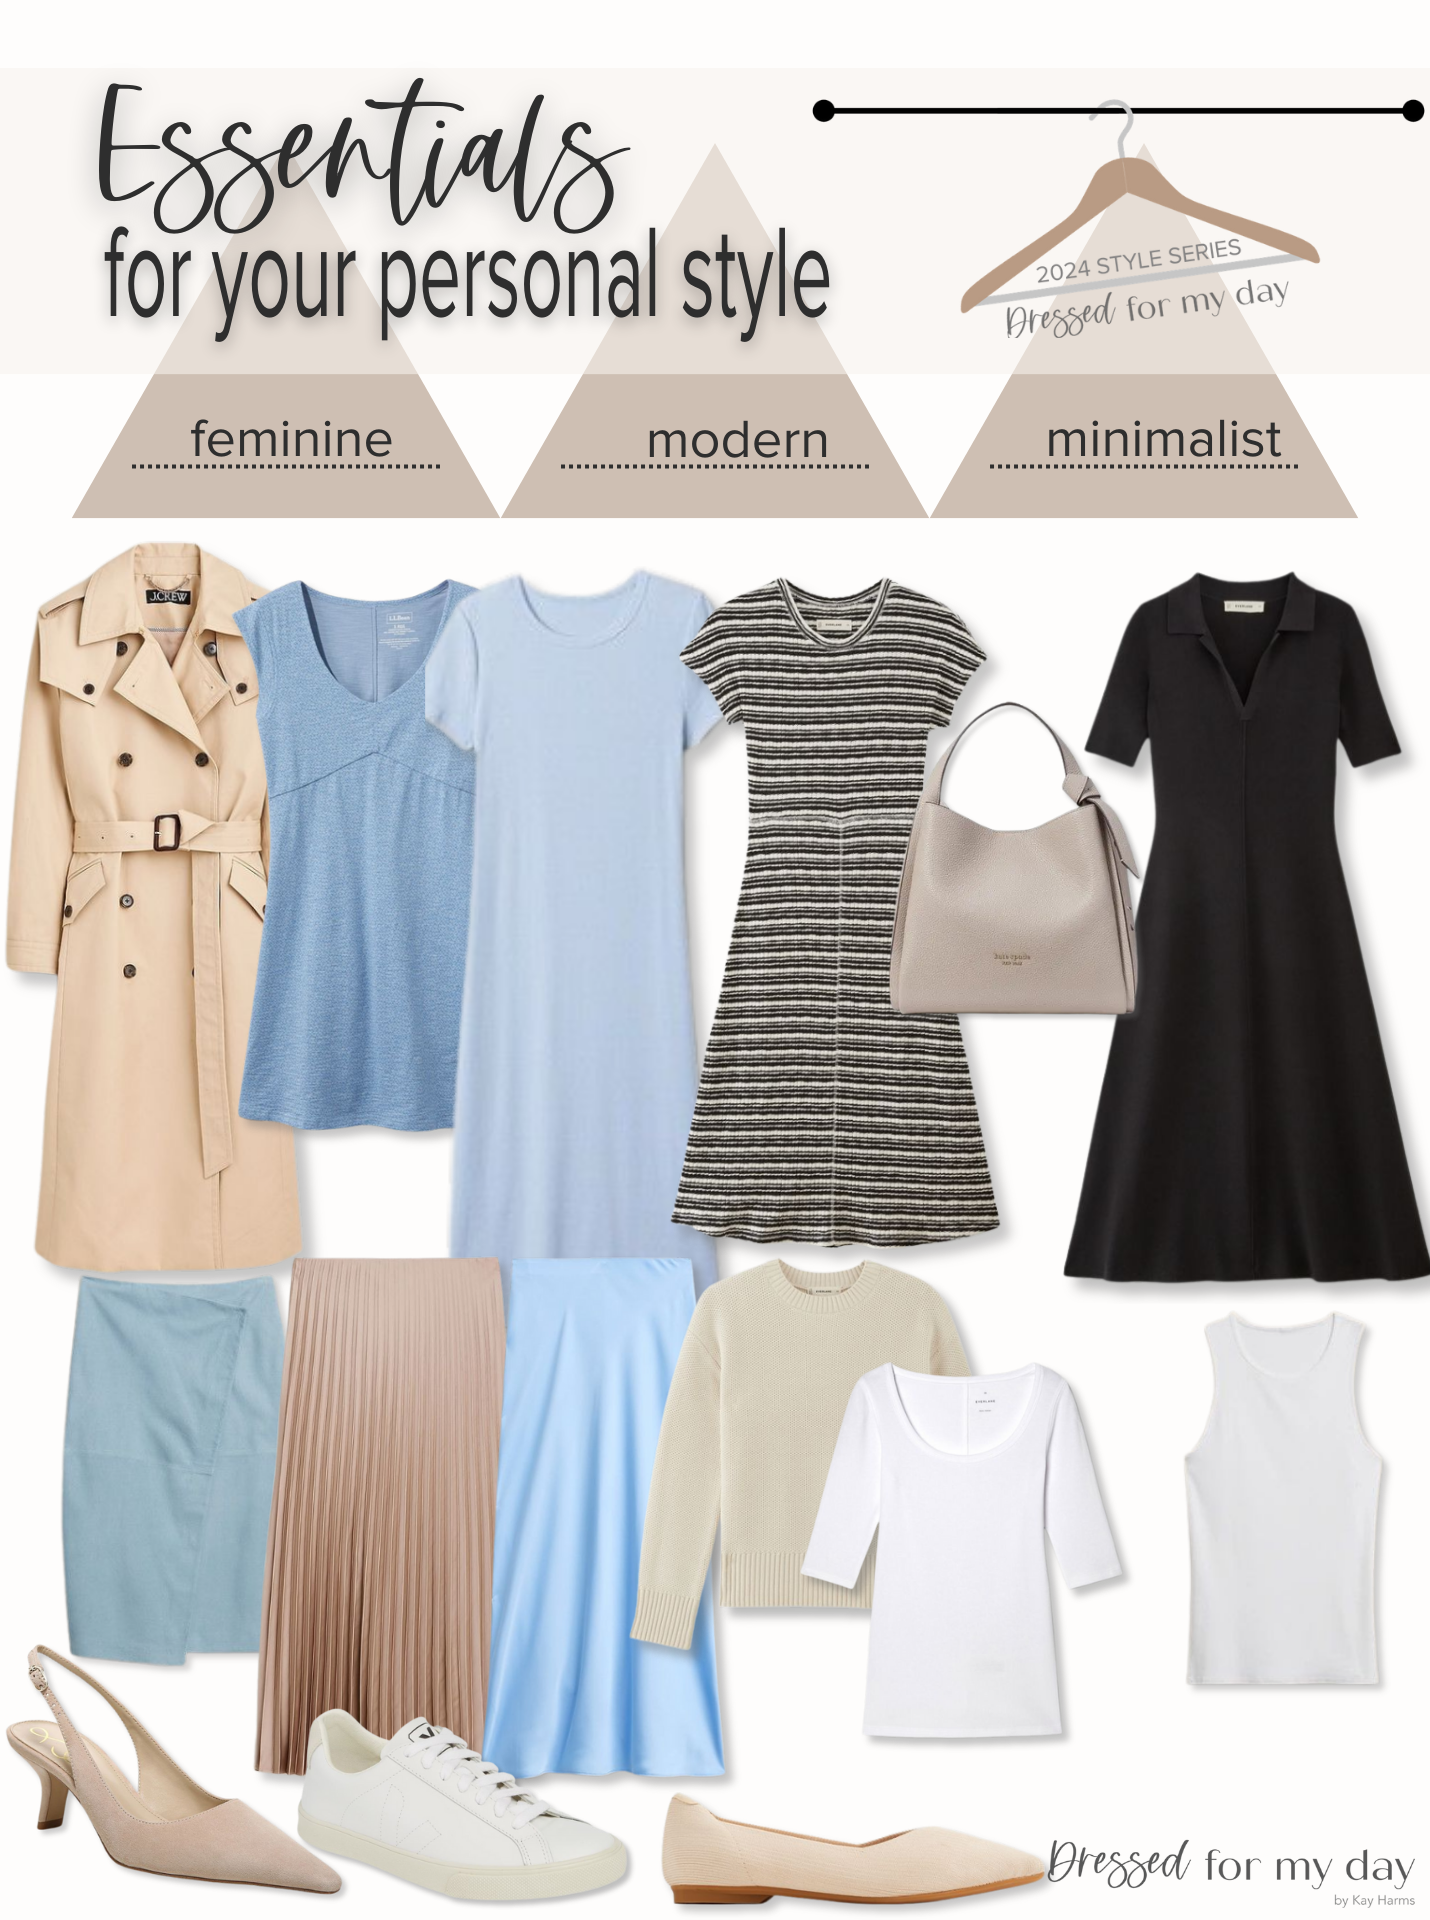 Essentials for Personal Styles 1 (3)